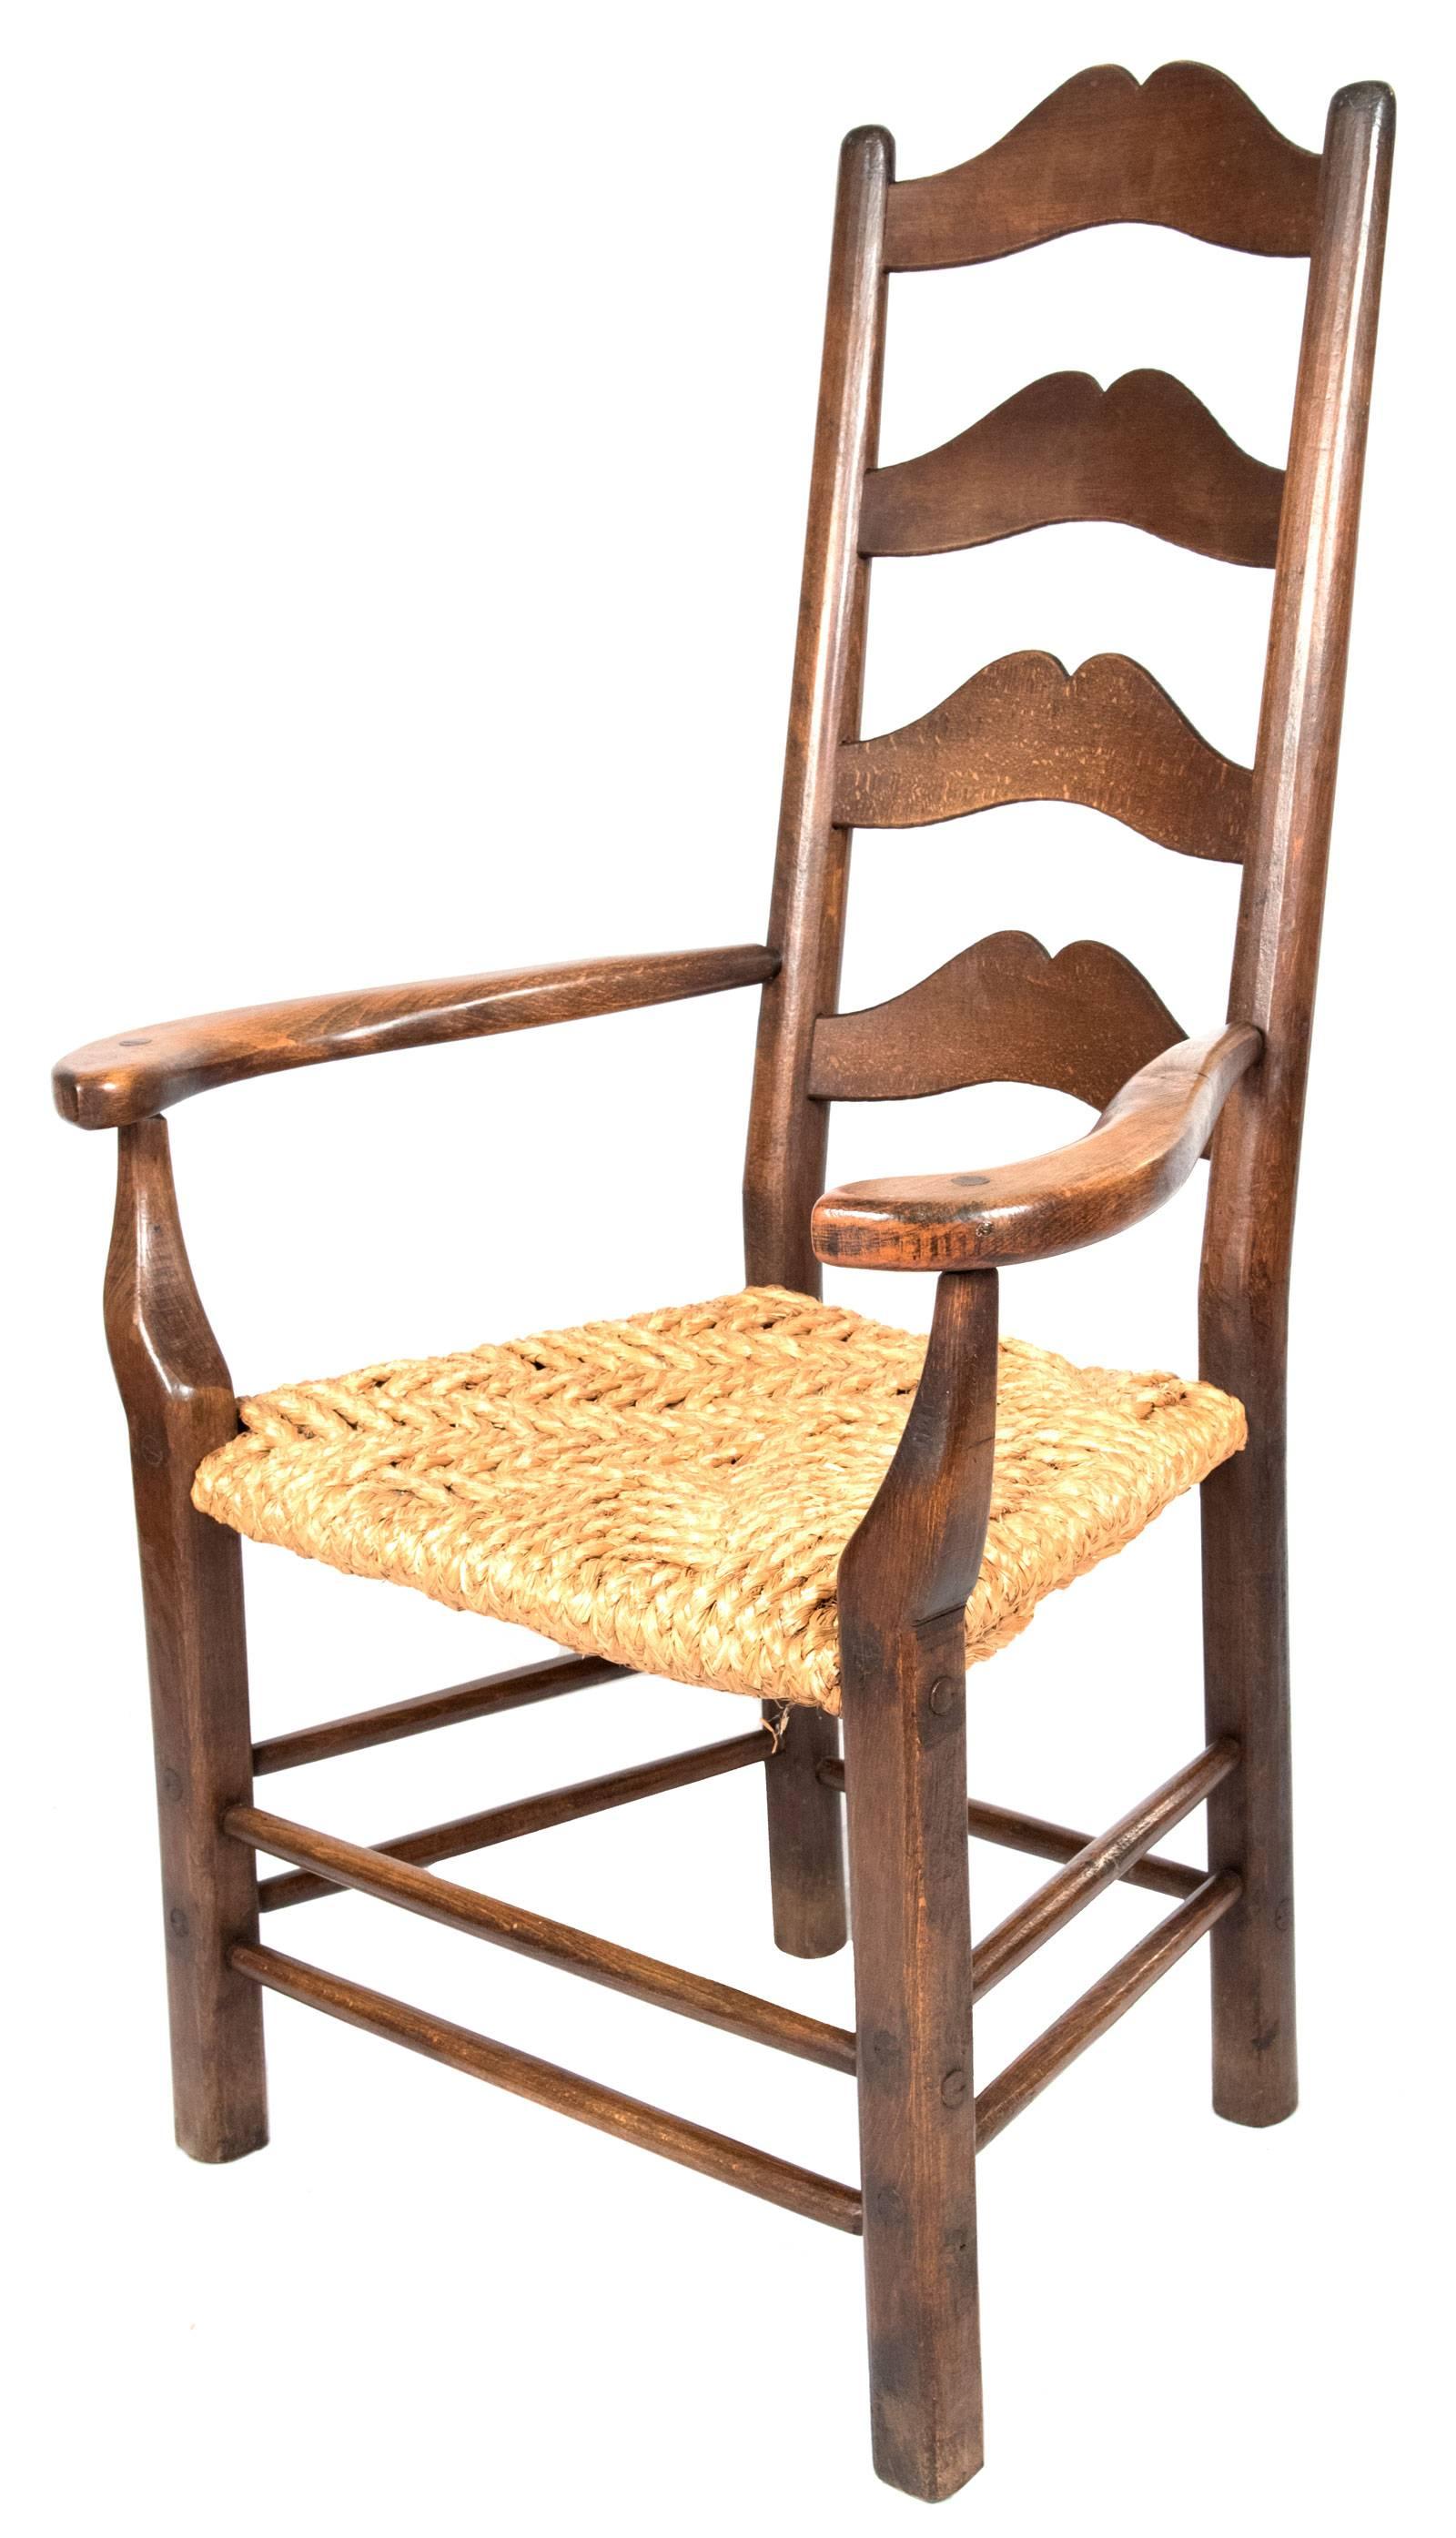 A set of provincial ashwood ladder back chairs with turned uprights connected by shaped splats above a rush seat, which is supported by simply turned legs and stretchers. The set includes nine chairs and one slightly oversized armchair.